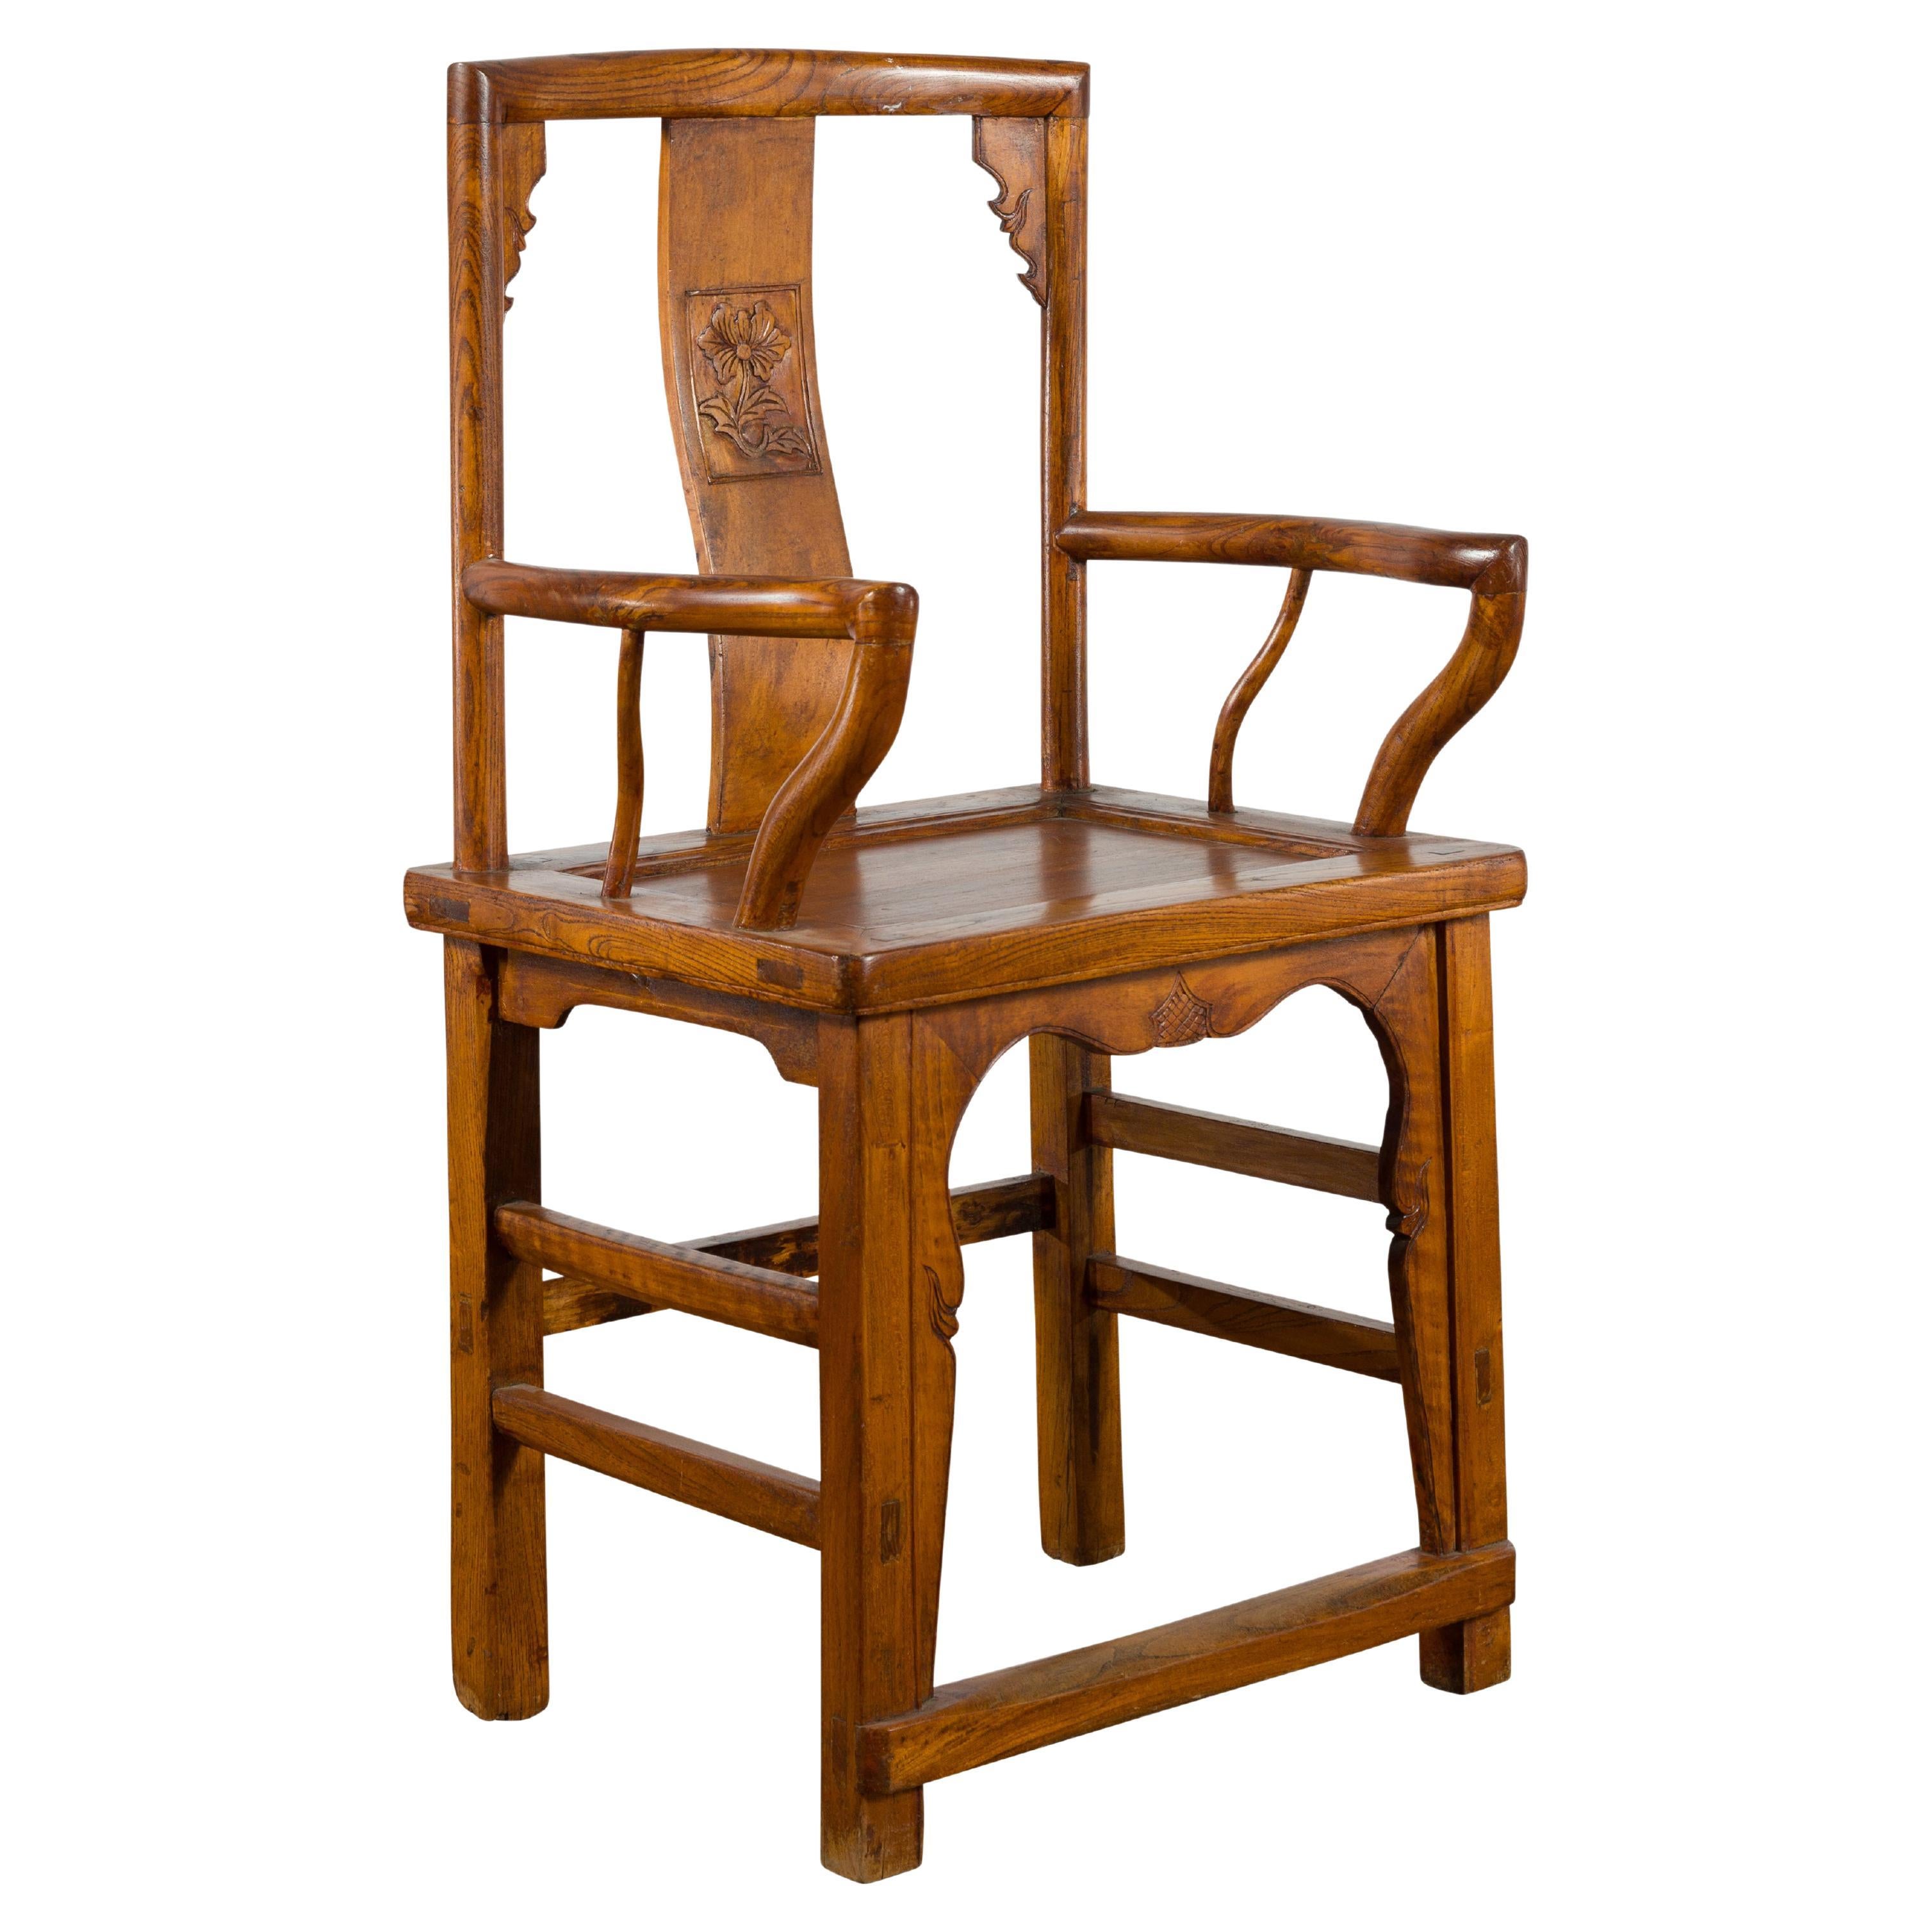 Chinese 19th Century Qing Chair with Open Arms and Hand-Carved Floral Motifs For Sale